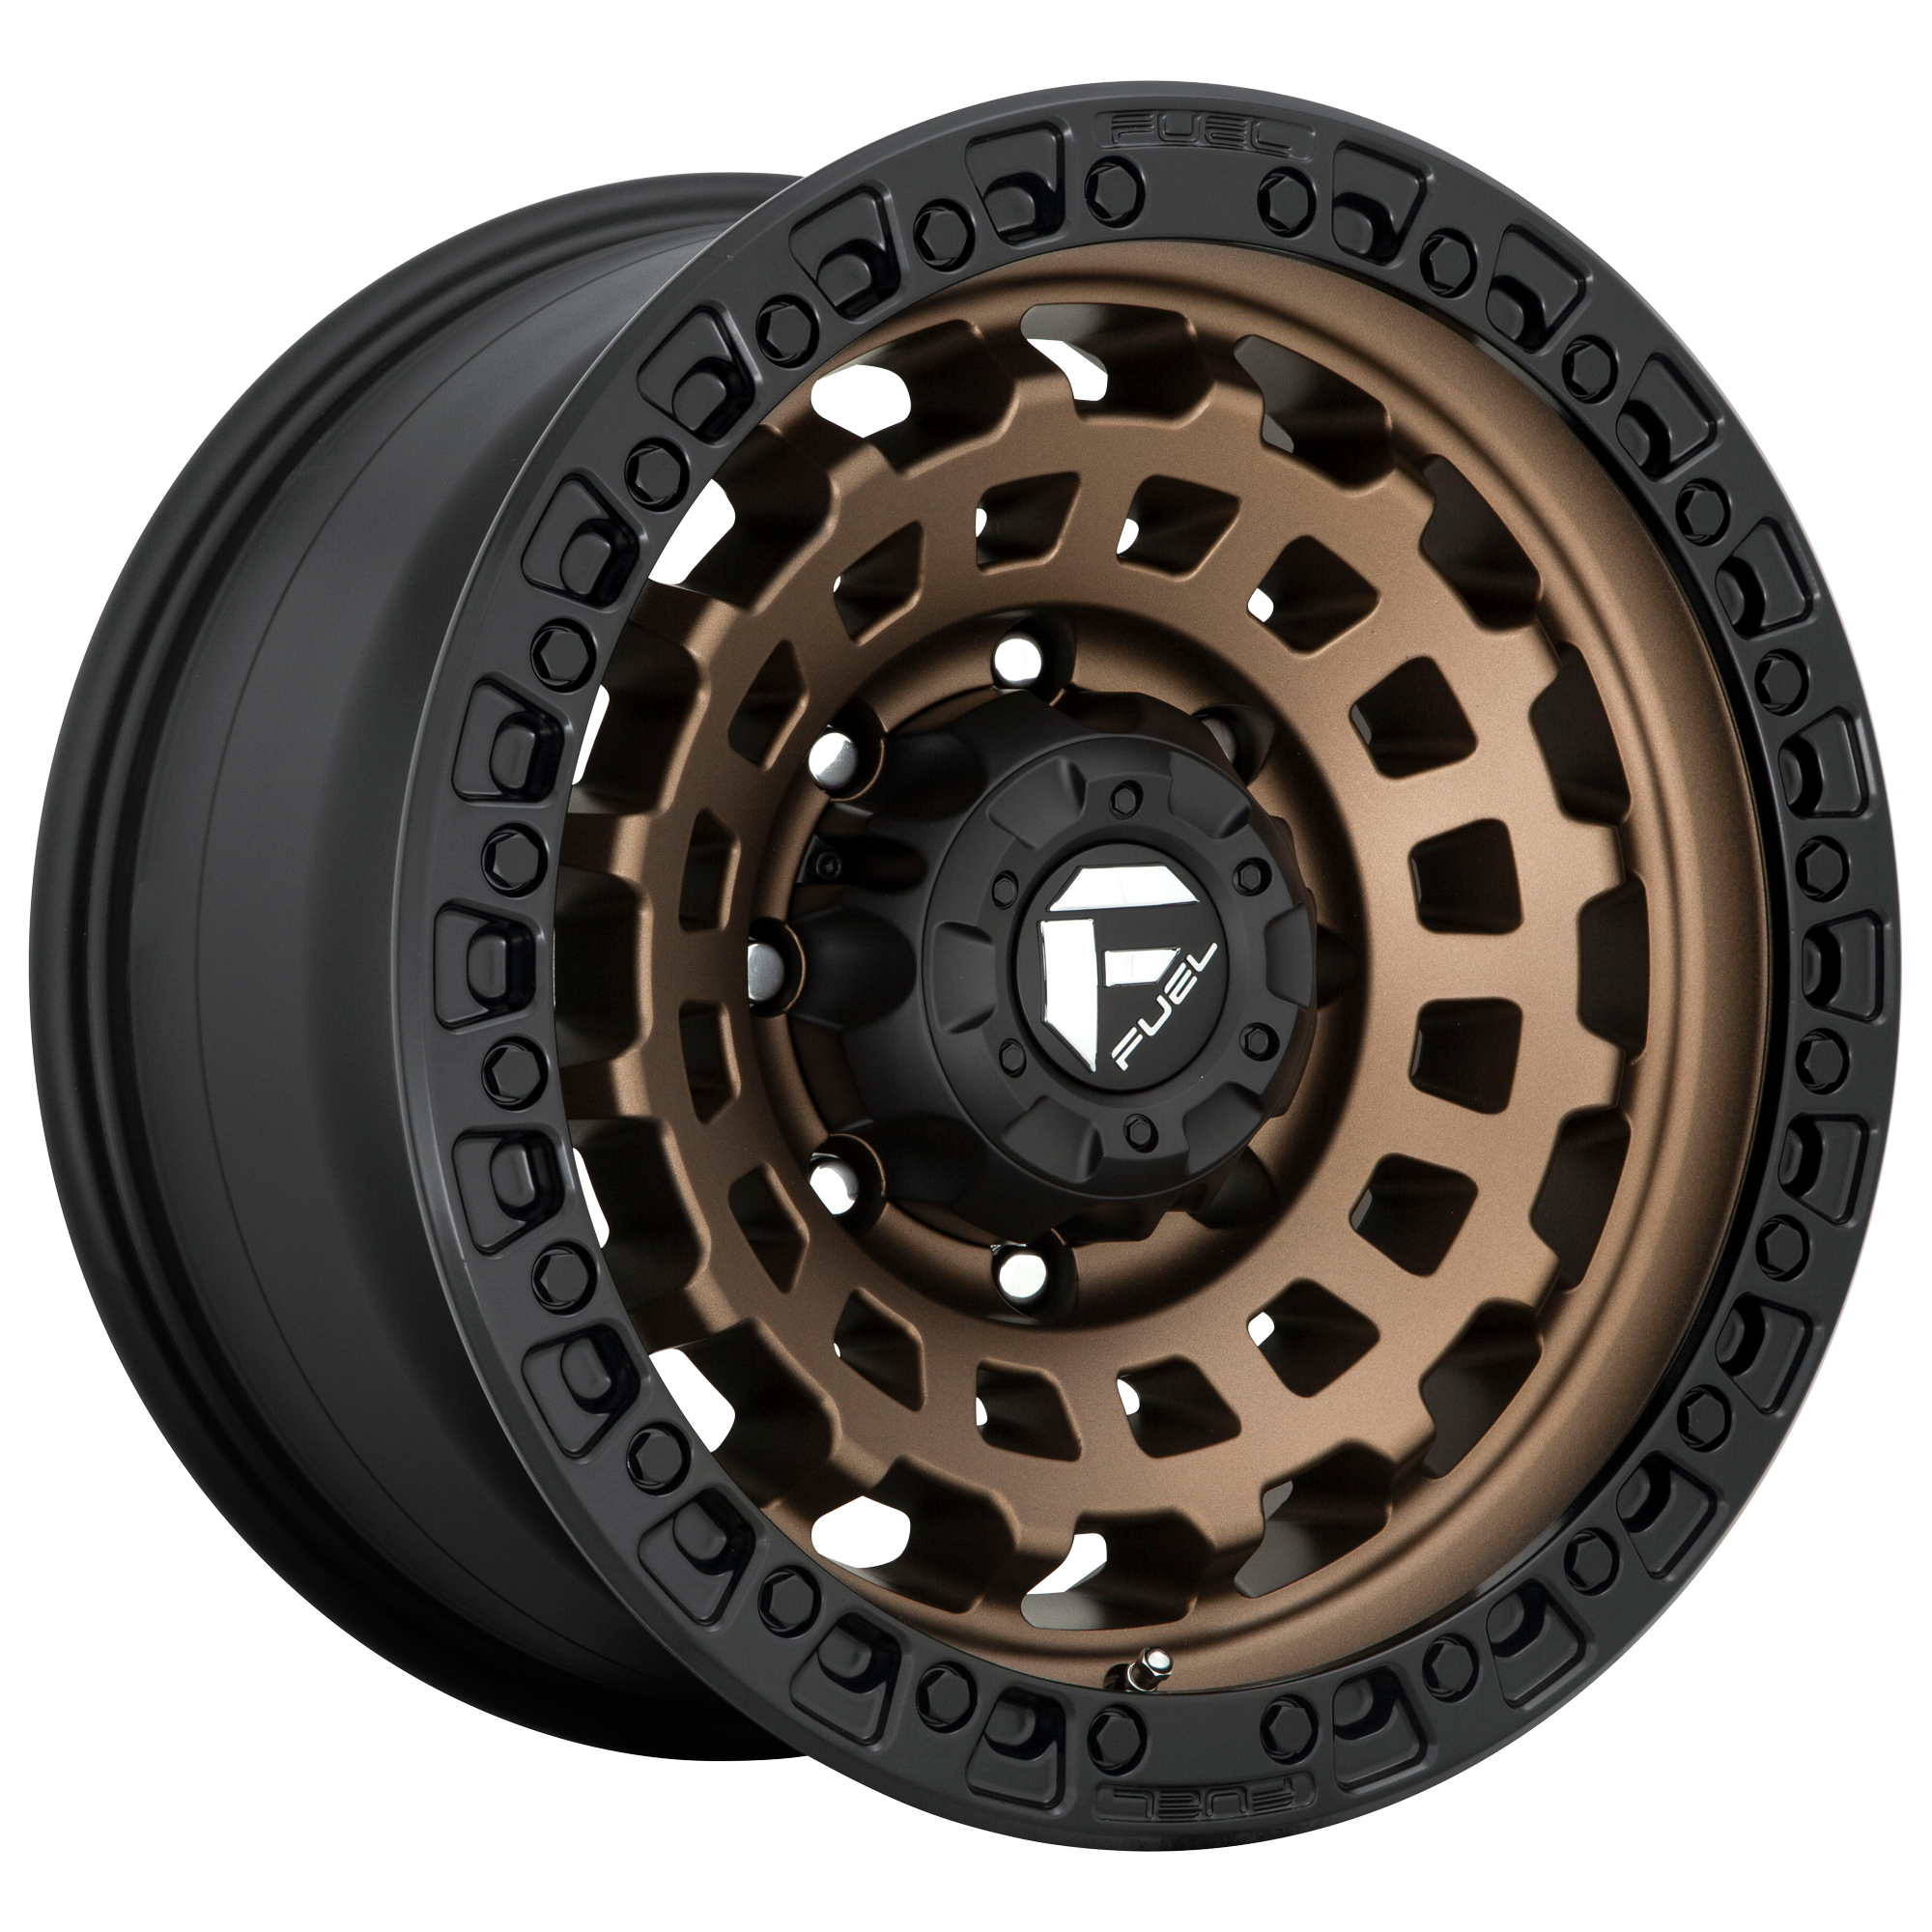 ZEPHYR 20x9 5x127.00 MATTE BRONZE BLACK BEAD RING (20 mm) - Tires and Engine Performance